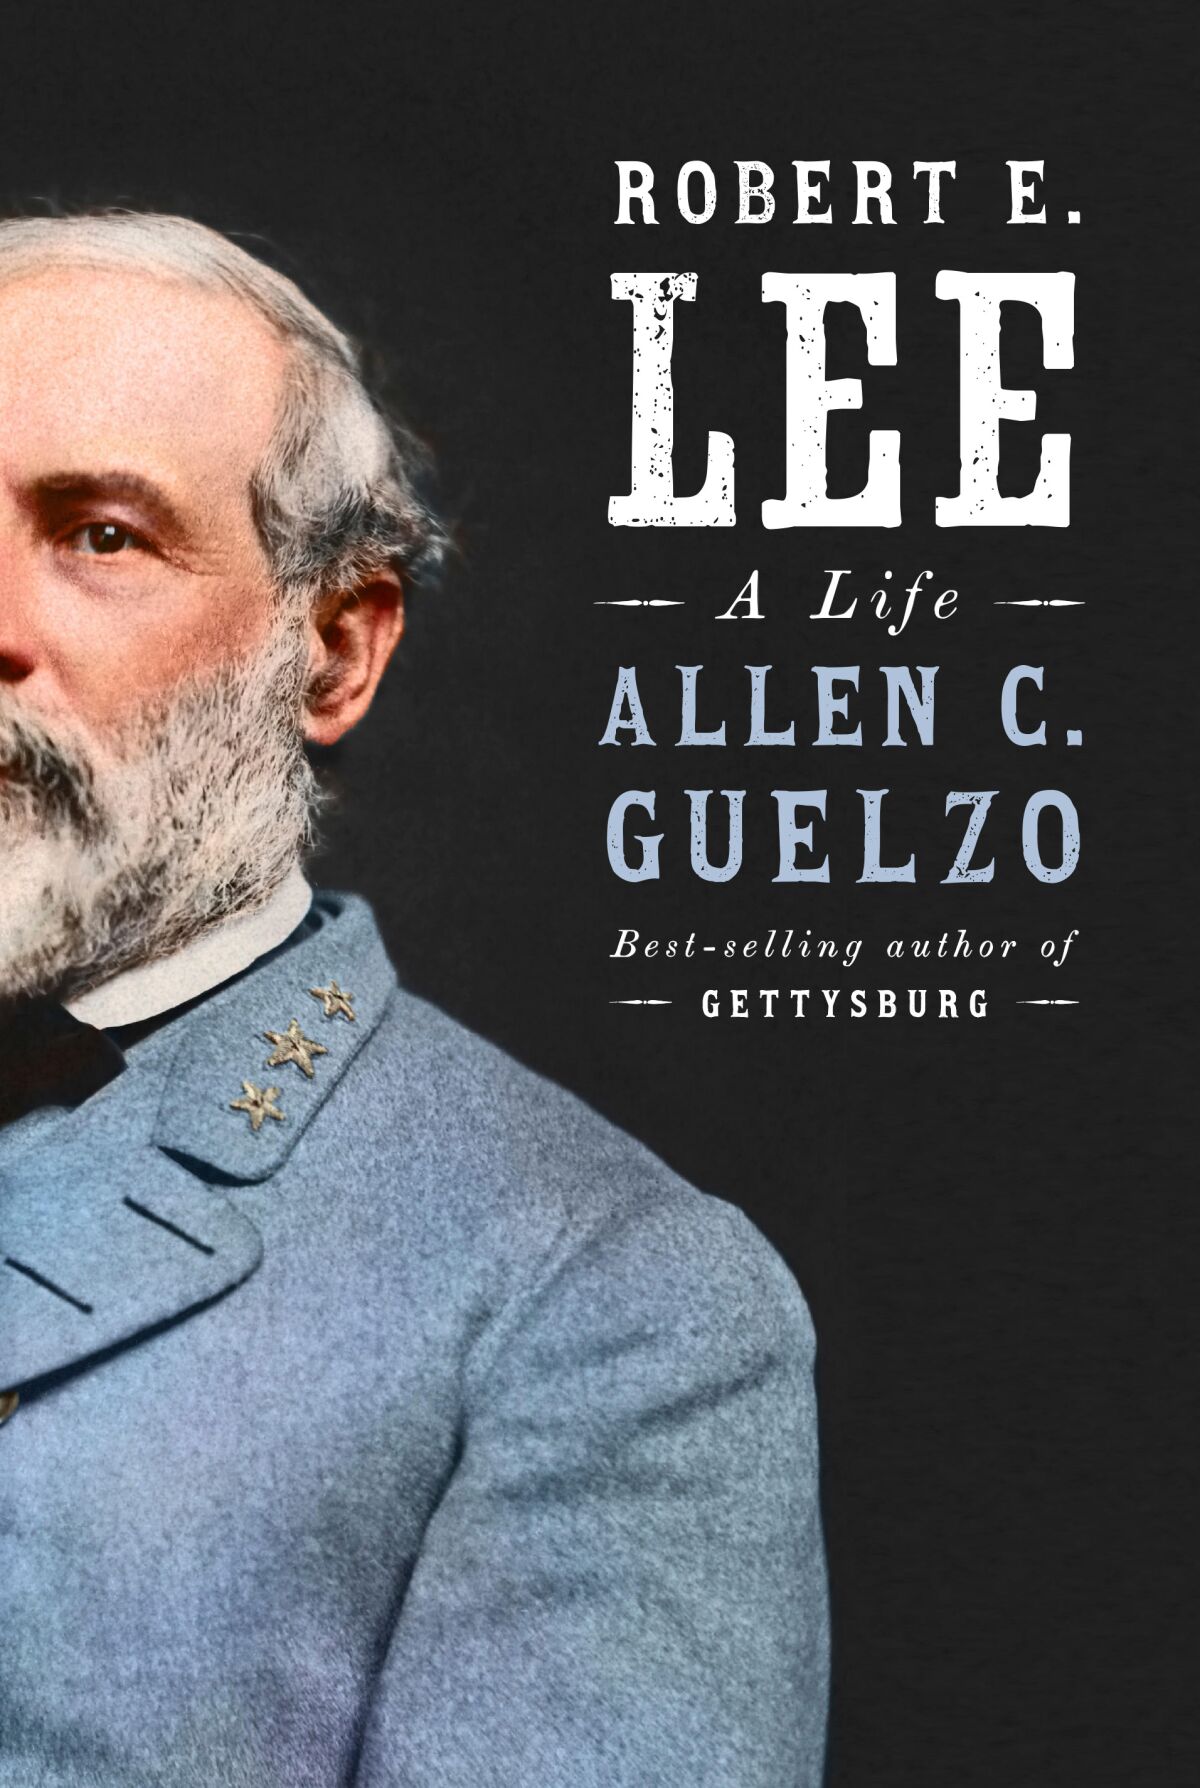 A book cover with a photo of a general on it and a title 